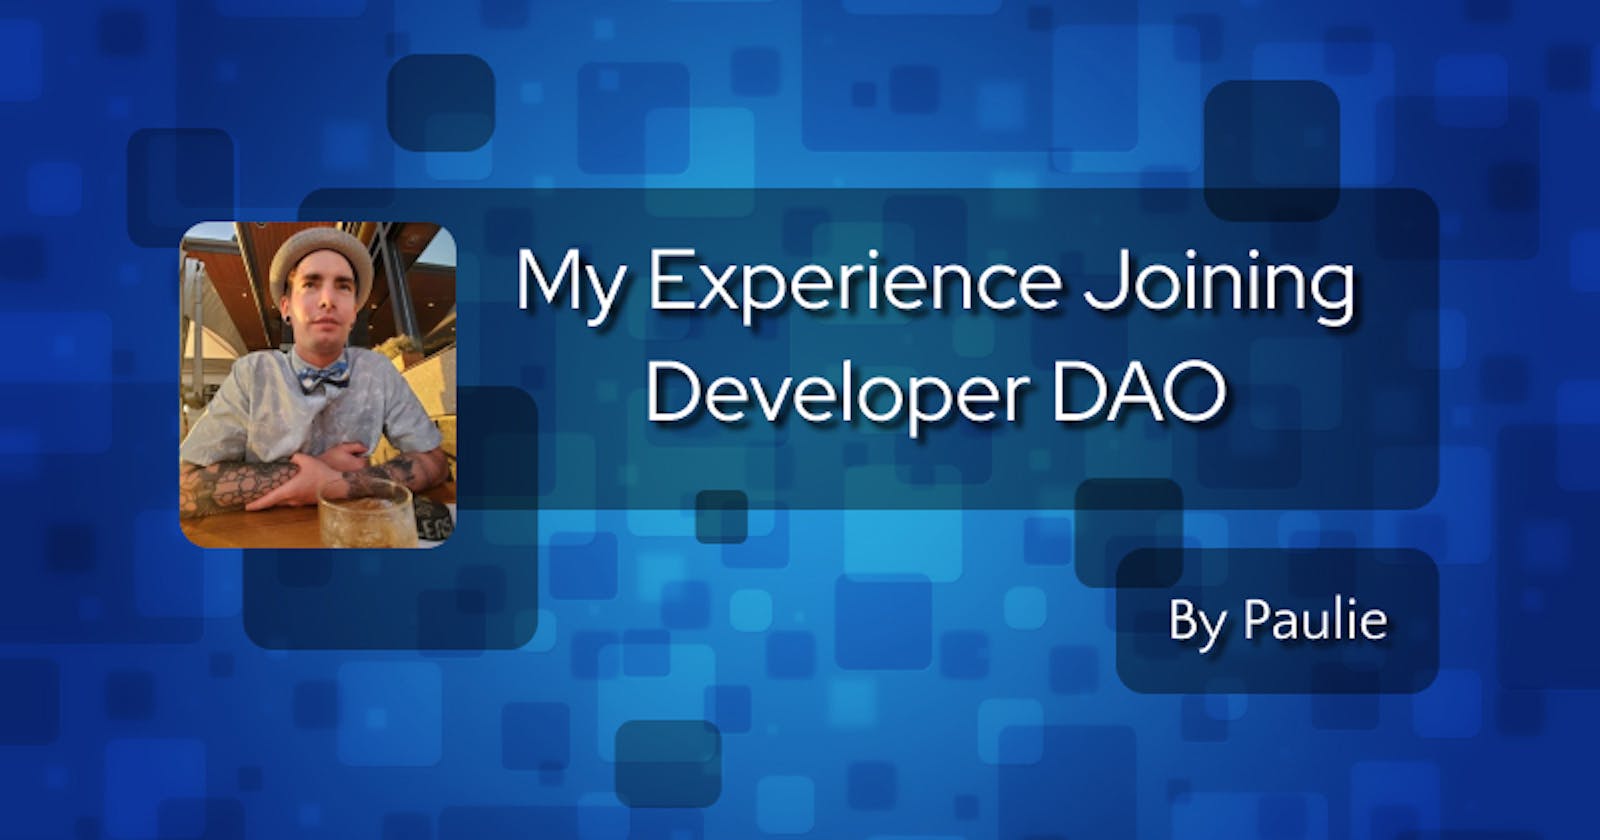 My Experience Joining Developer DAO